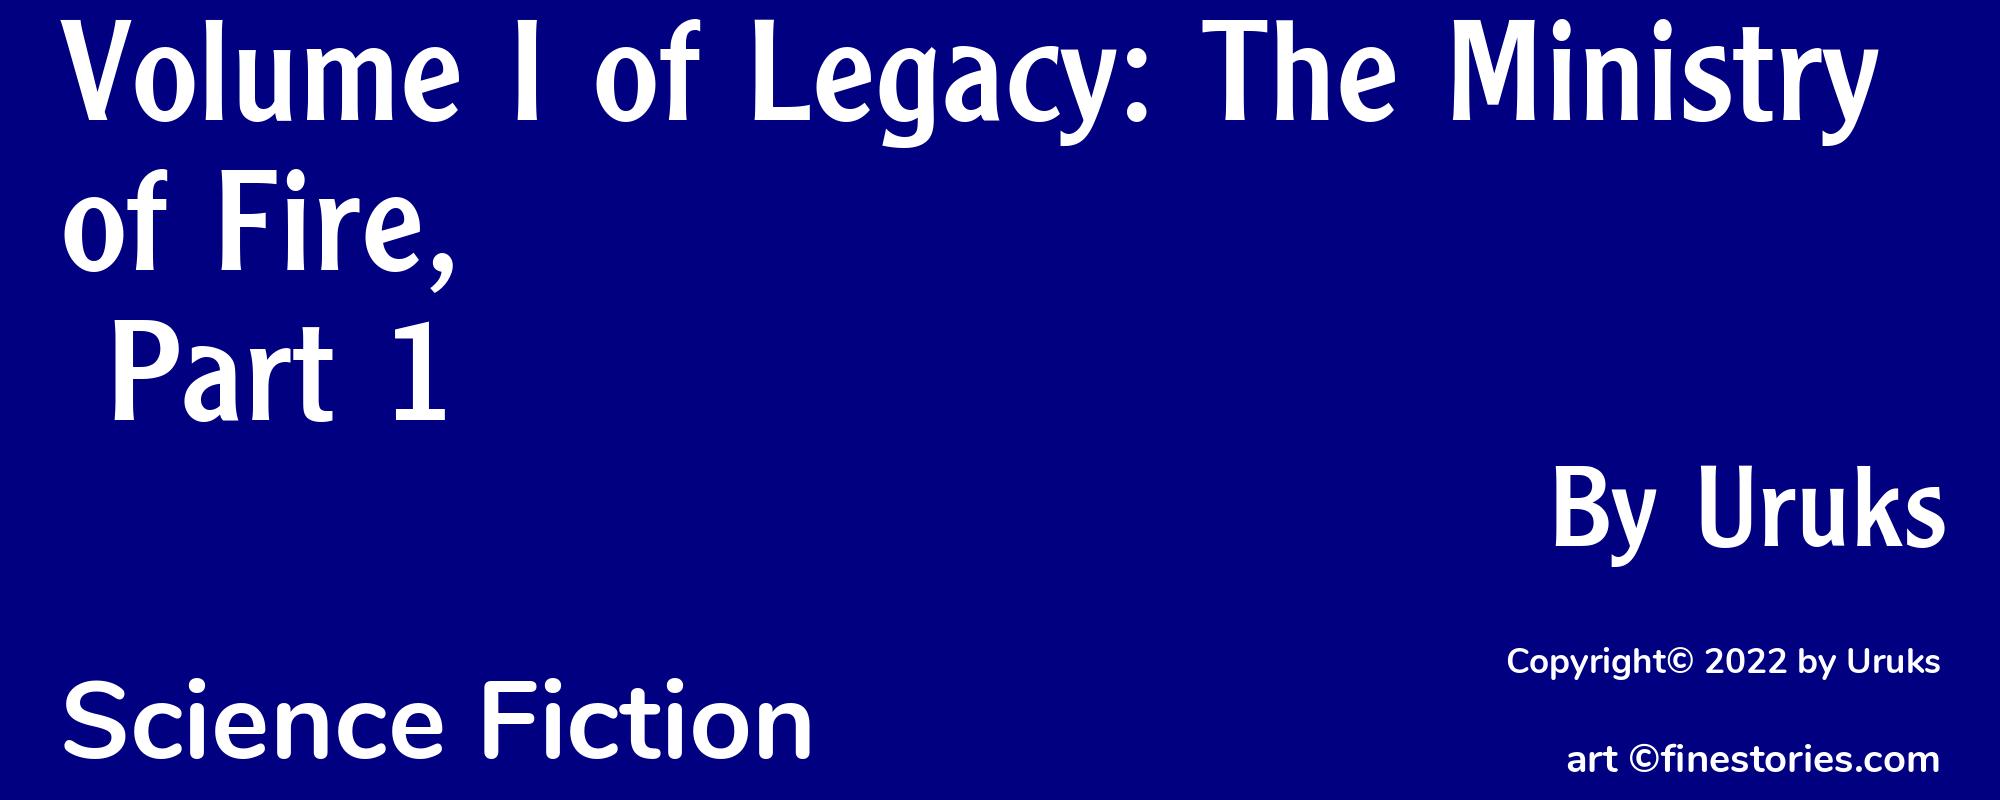 Volume I of Legacy: The Ministry of Fire, Part 1 - Cover